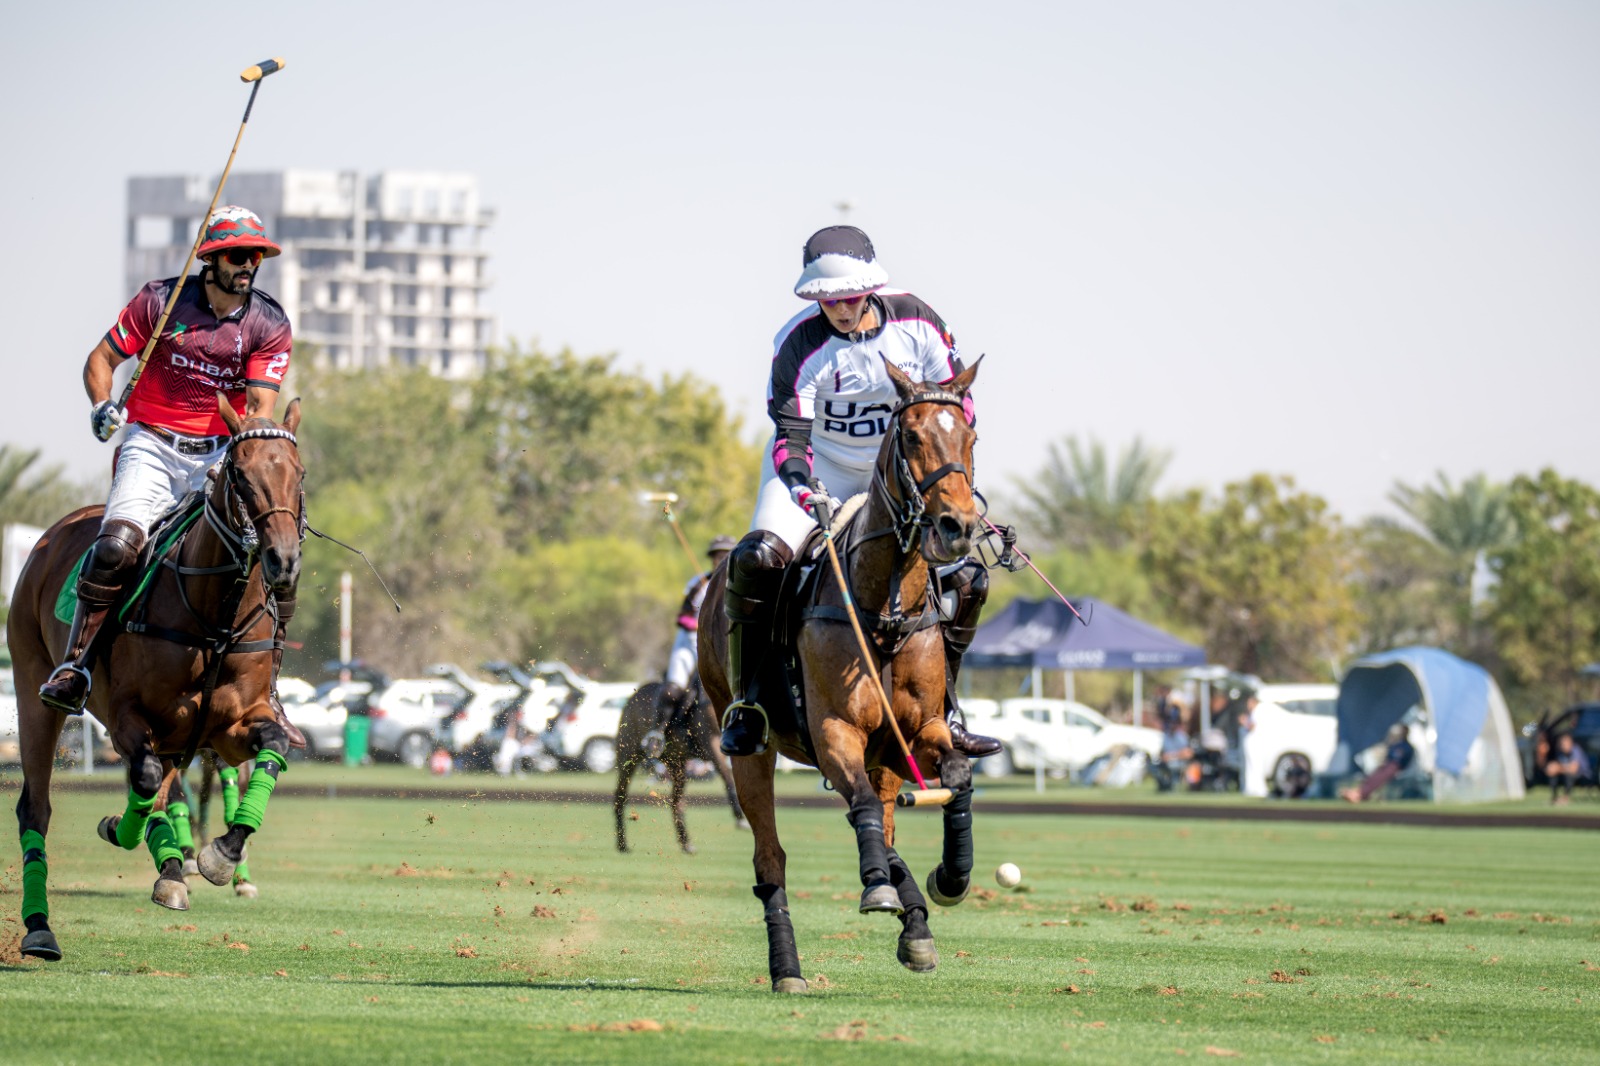 “Al Habtoor” and “Dubai Wolves” qualified for the final of the Dubai Polo Gold Cup